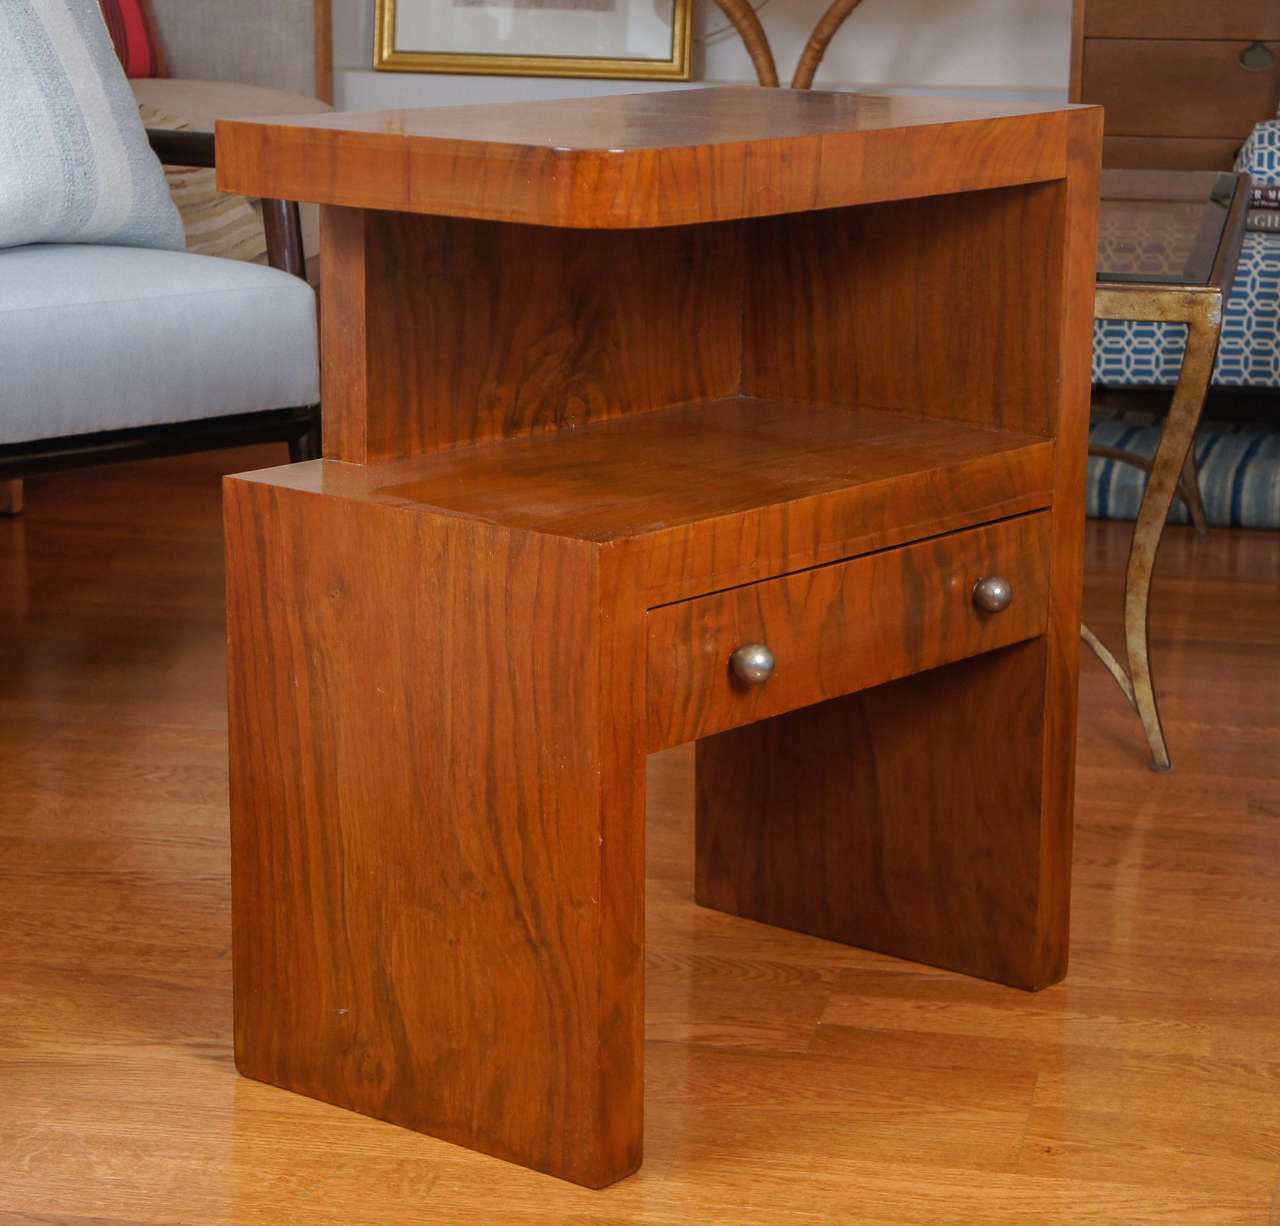 Unique and functional, side table with single drawer and open shelf.